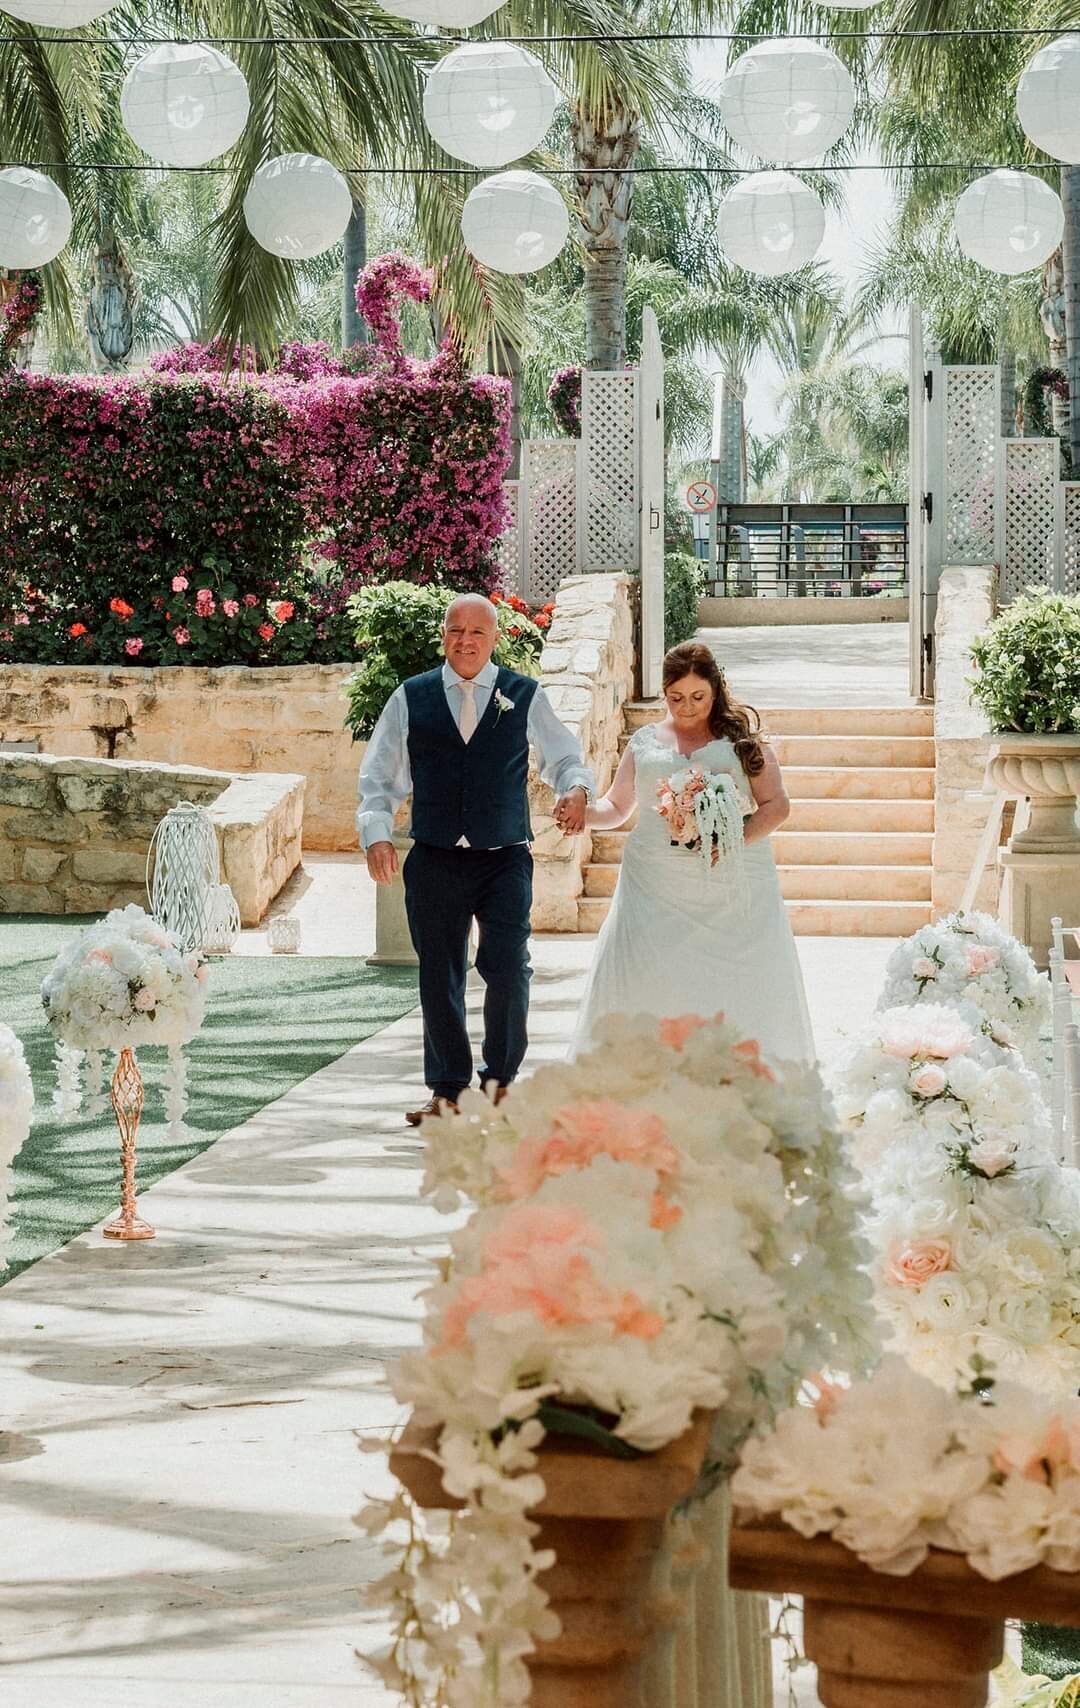 Bride walking with her father down the aisle surrounded by peach and white flowers